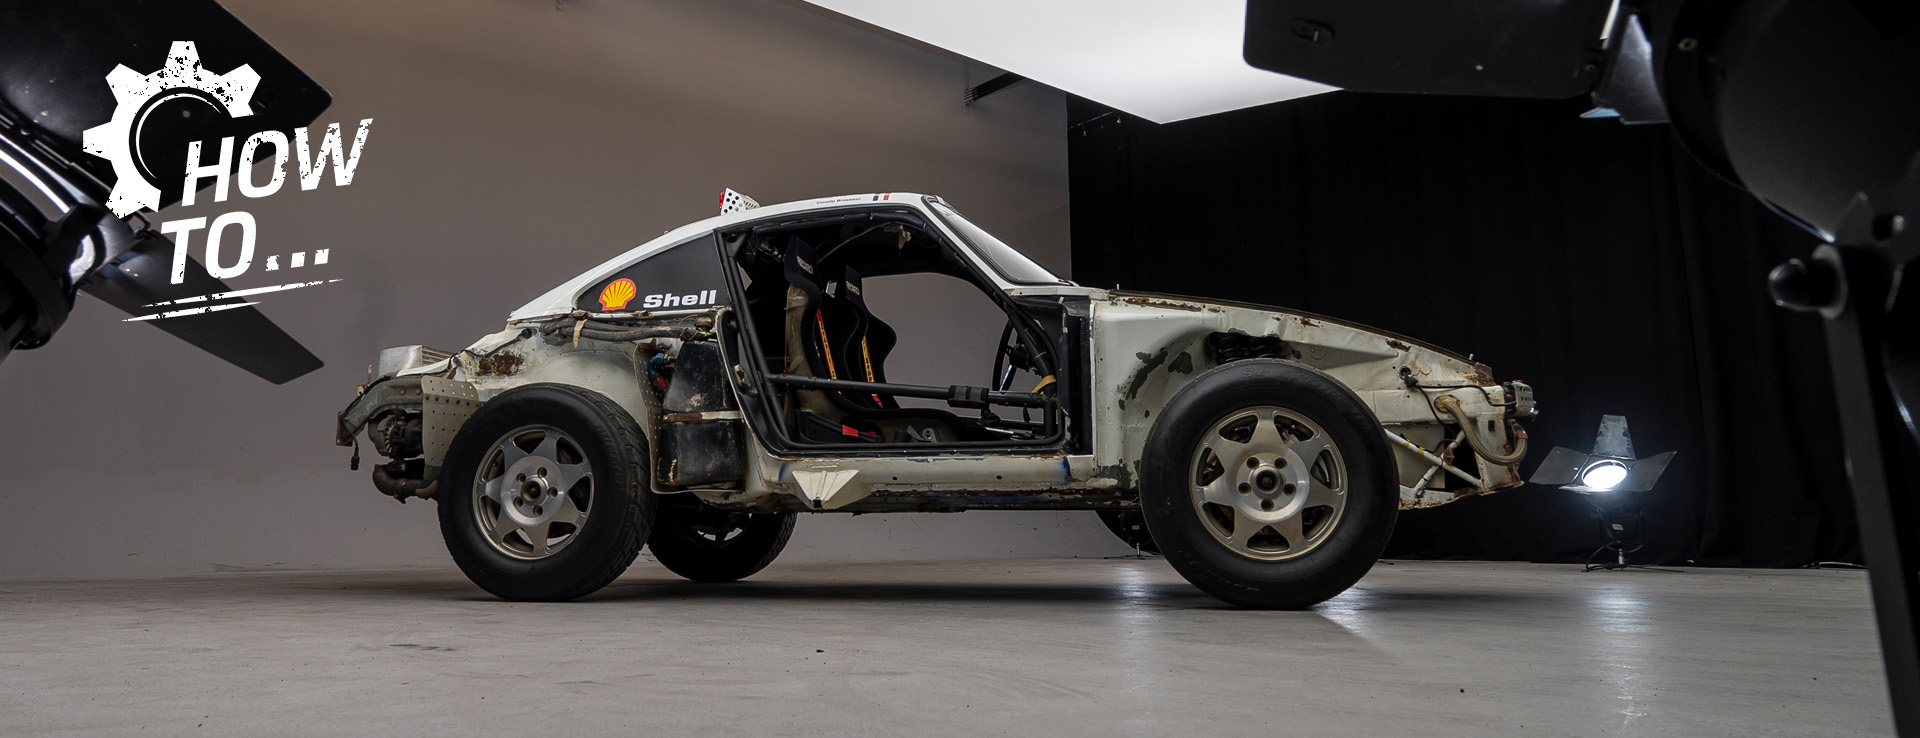 Stripped-down Porsche 959 with doors removed in a photo studio